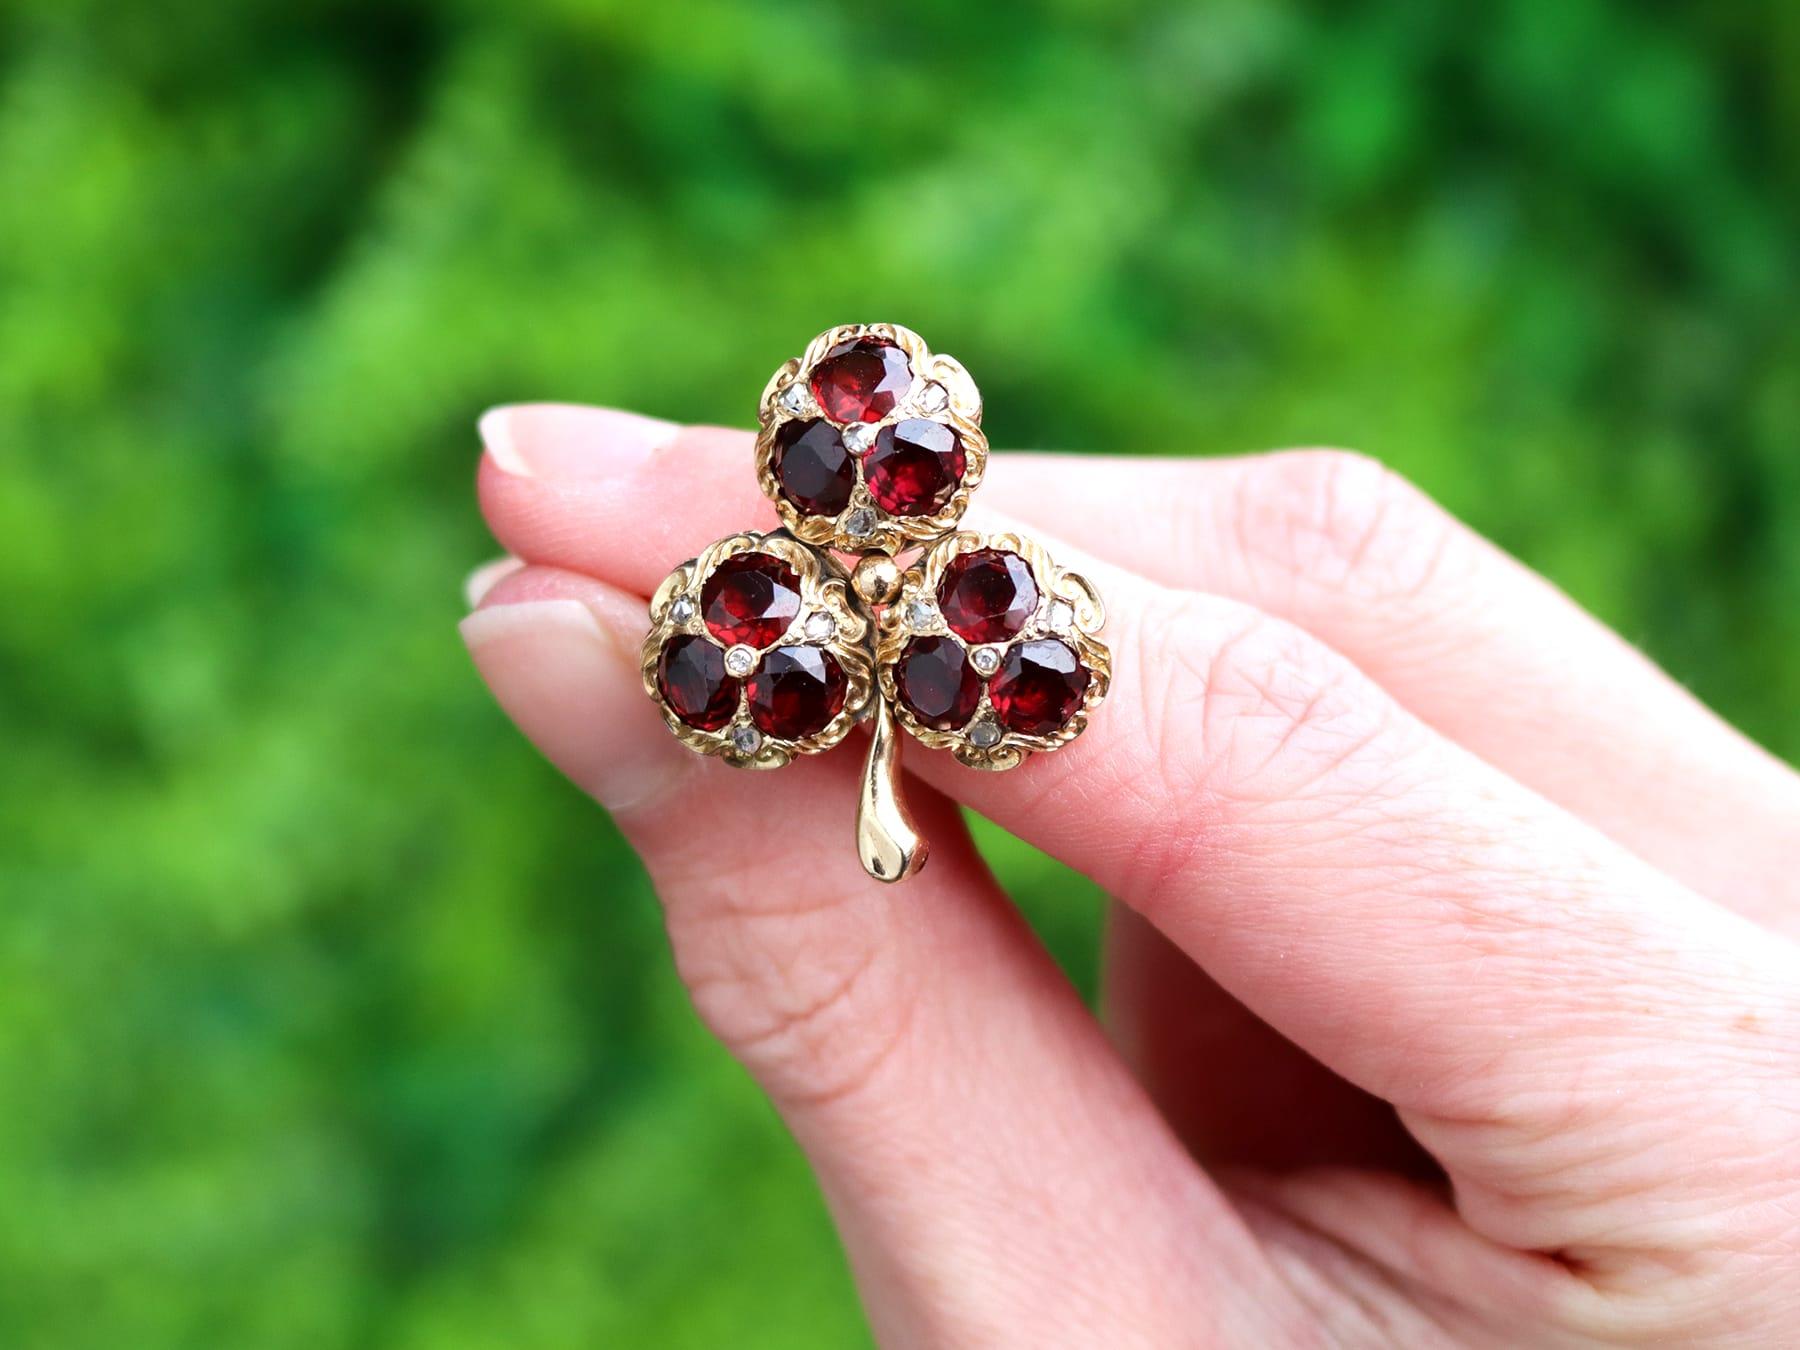 An exceptional antique Victorian 5.20 carat garnet and 0.11 carat diamond, 15k yellow gold 'clover' brooch; part of our diverse antique jewelry and estate jewelry collections.

This exceptional, fine and impressive Victorian garnet brooch has been